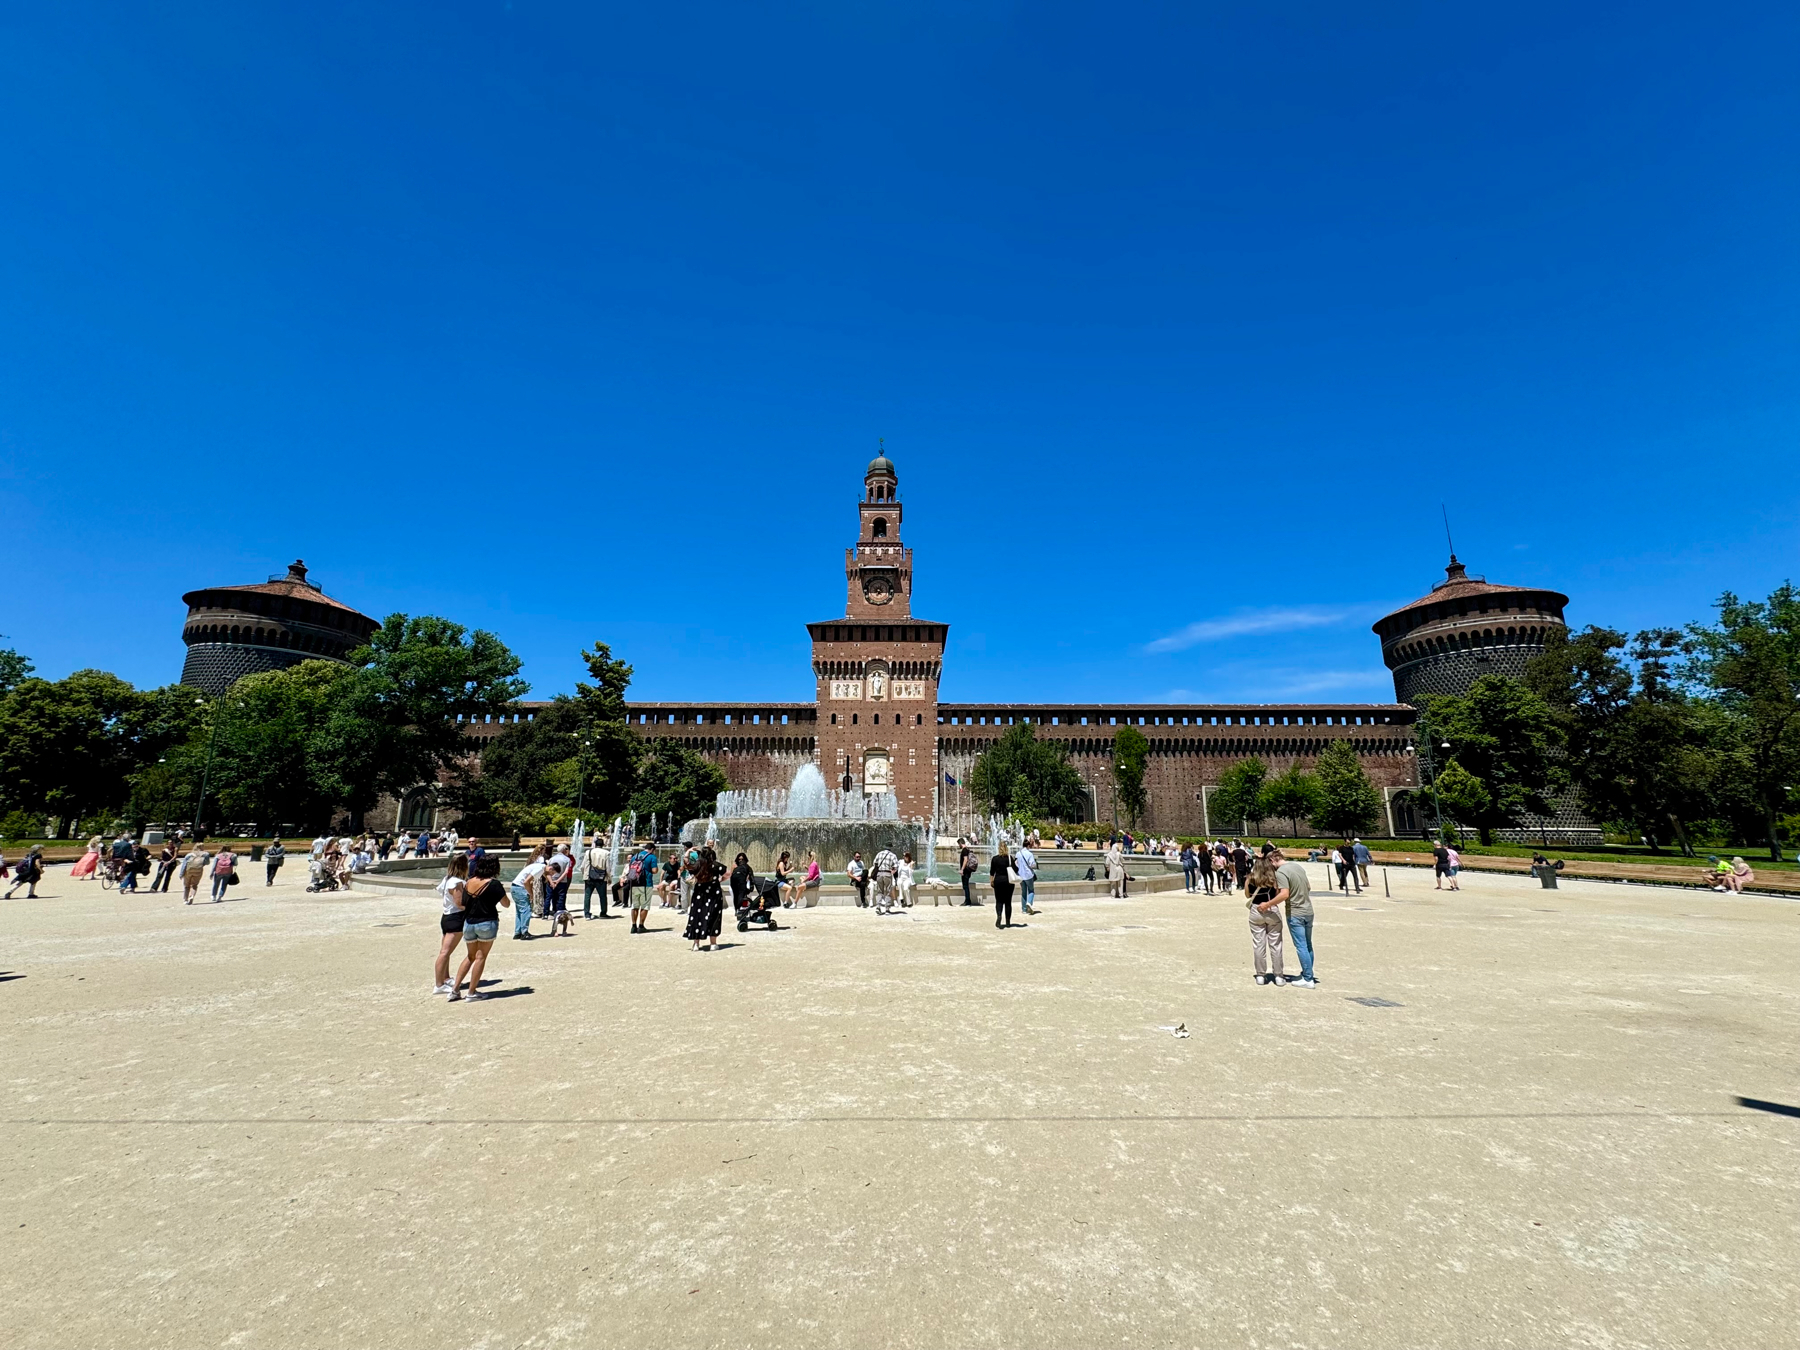 Image of Sforza Castle (Castello Sforzesco) in Milan, Italy, on a clear day. The castle’s central tower and side towers are prominent. There are people walking and gathering near the fountain in the foreground.